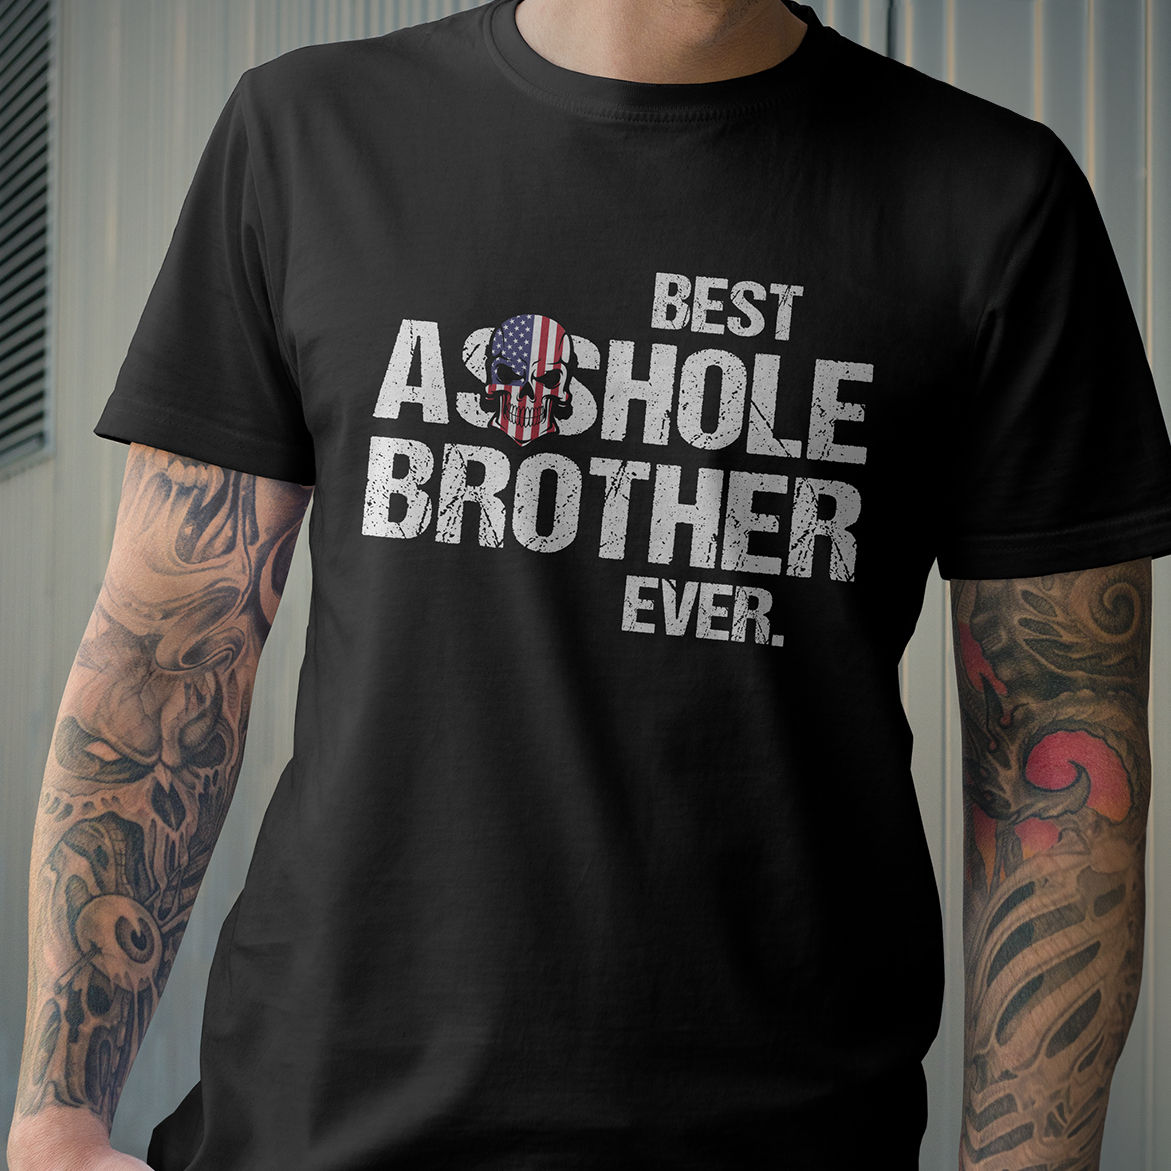 Funny Shirt Best Asshole Brother Ever Shirt 2232